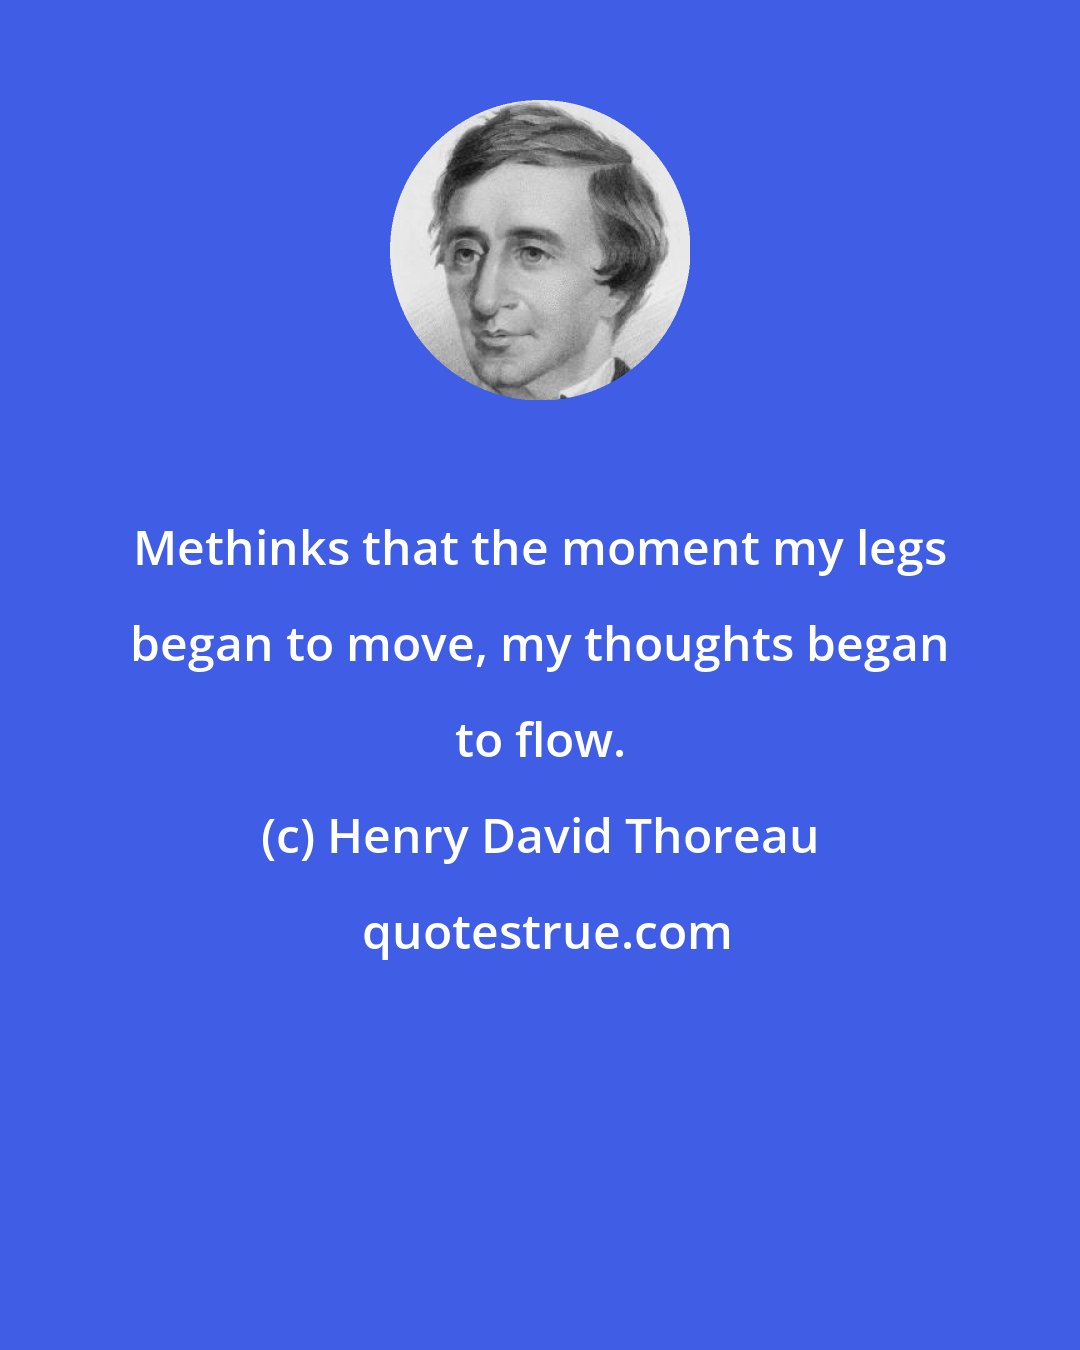 Henry David Thoreau: Methinks that the moment my legs began to move, my thoughts began to flow.